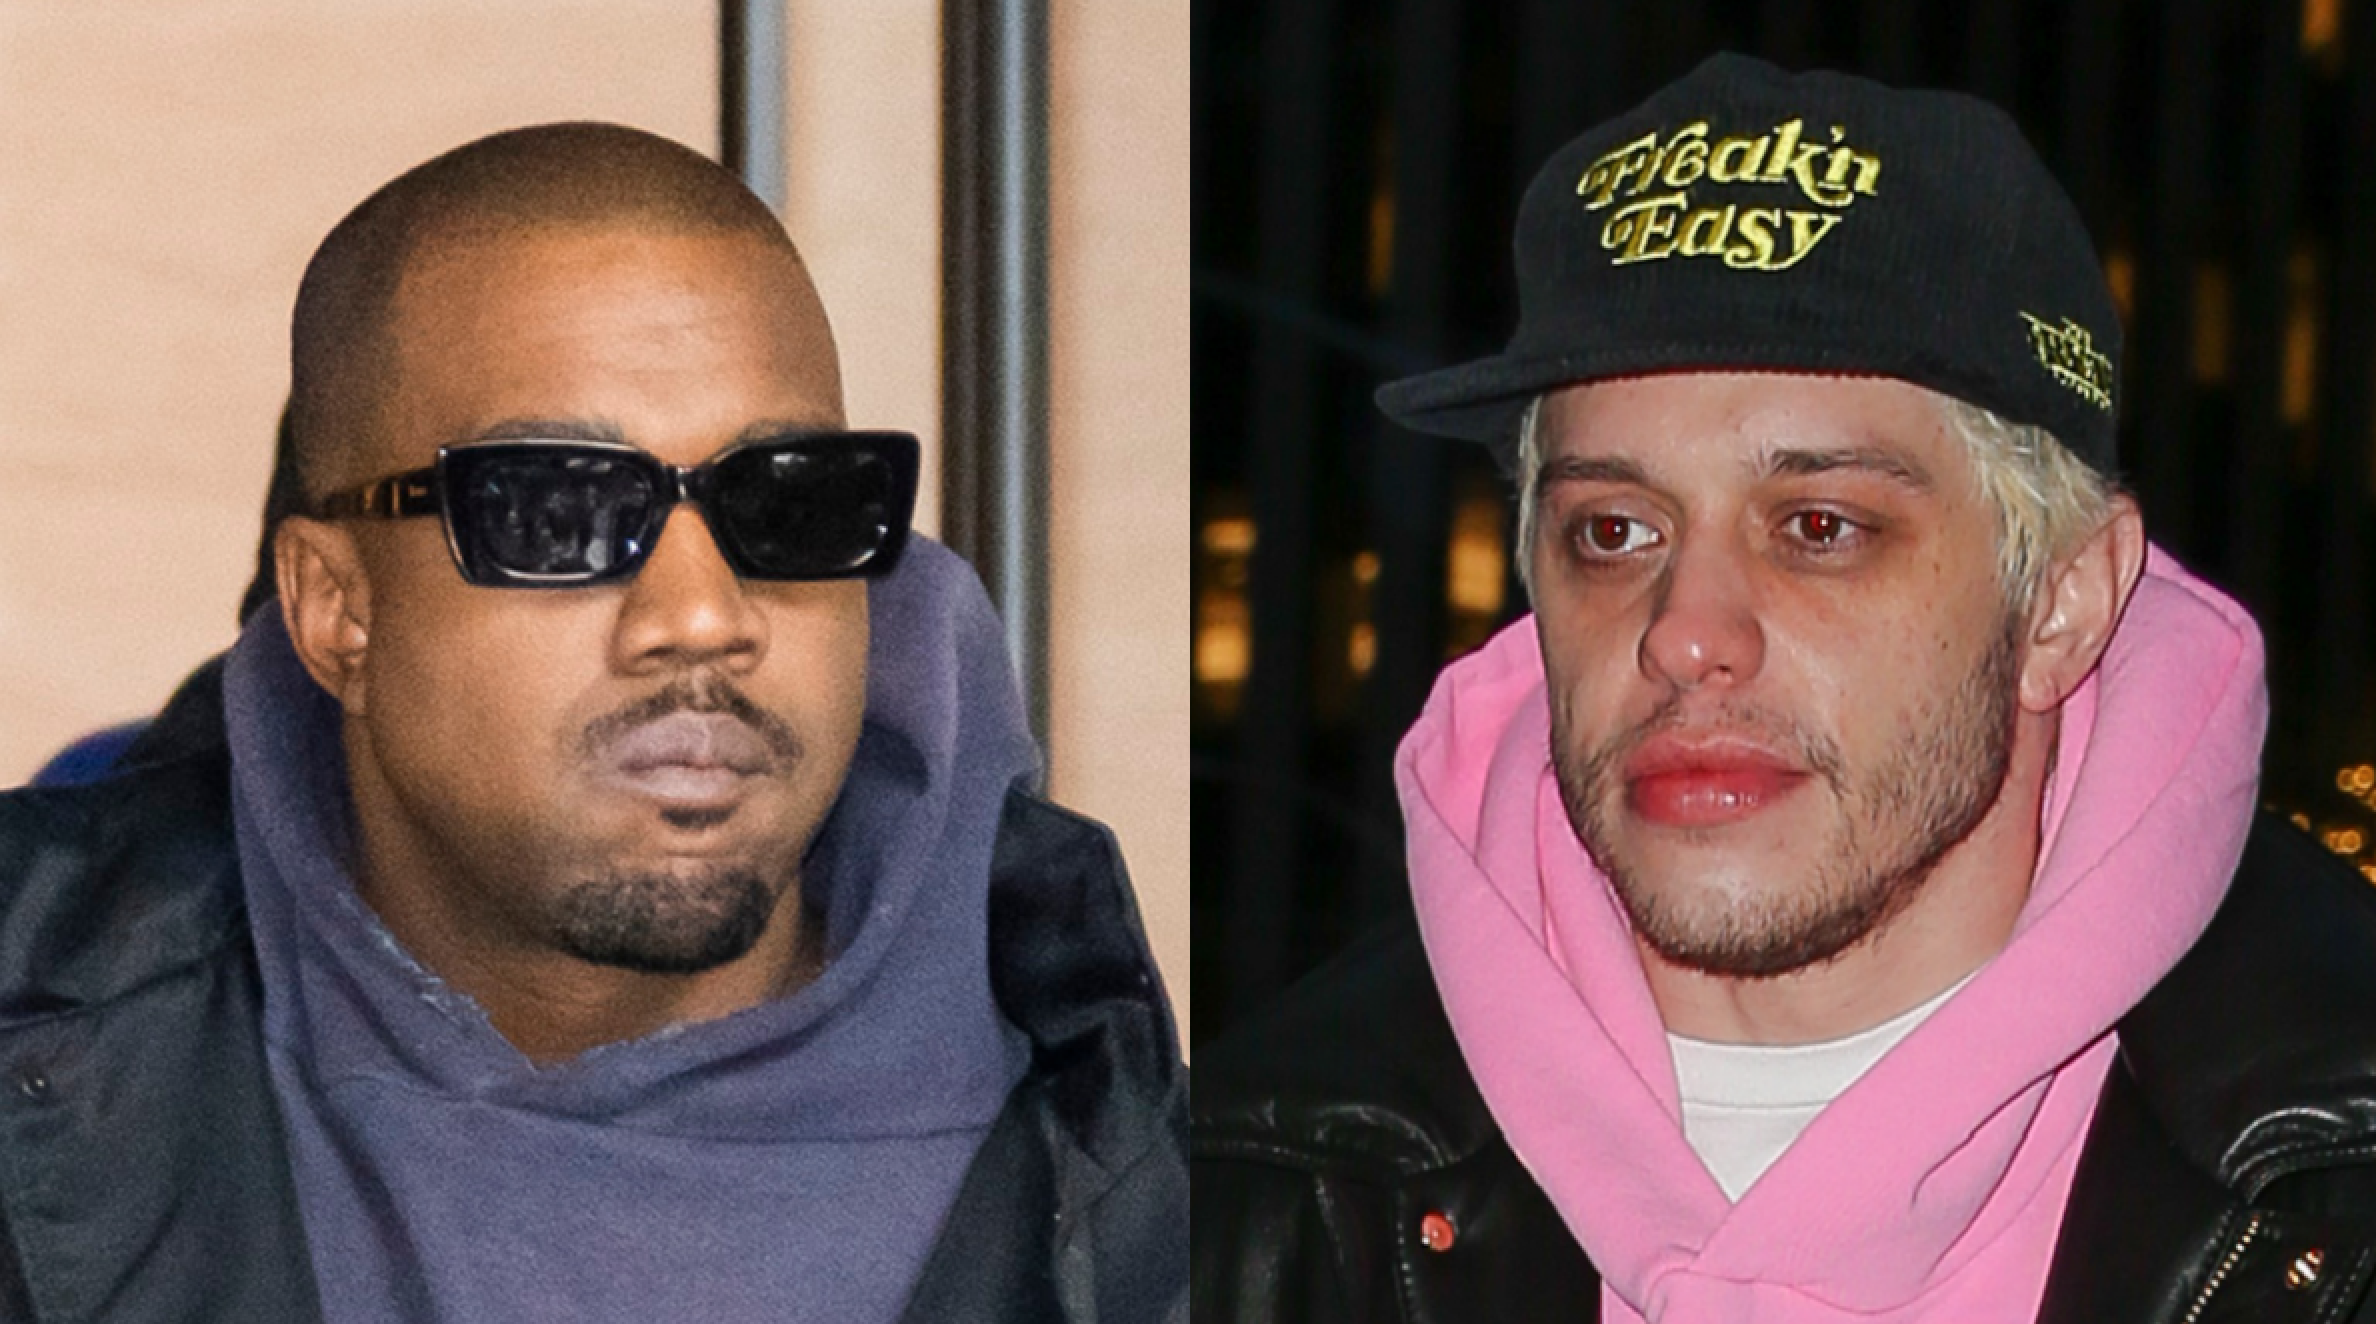 Pete Davidson FIRES SHOTS At Kanye On Instagram… This Could Get MESSY!